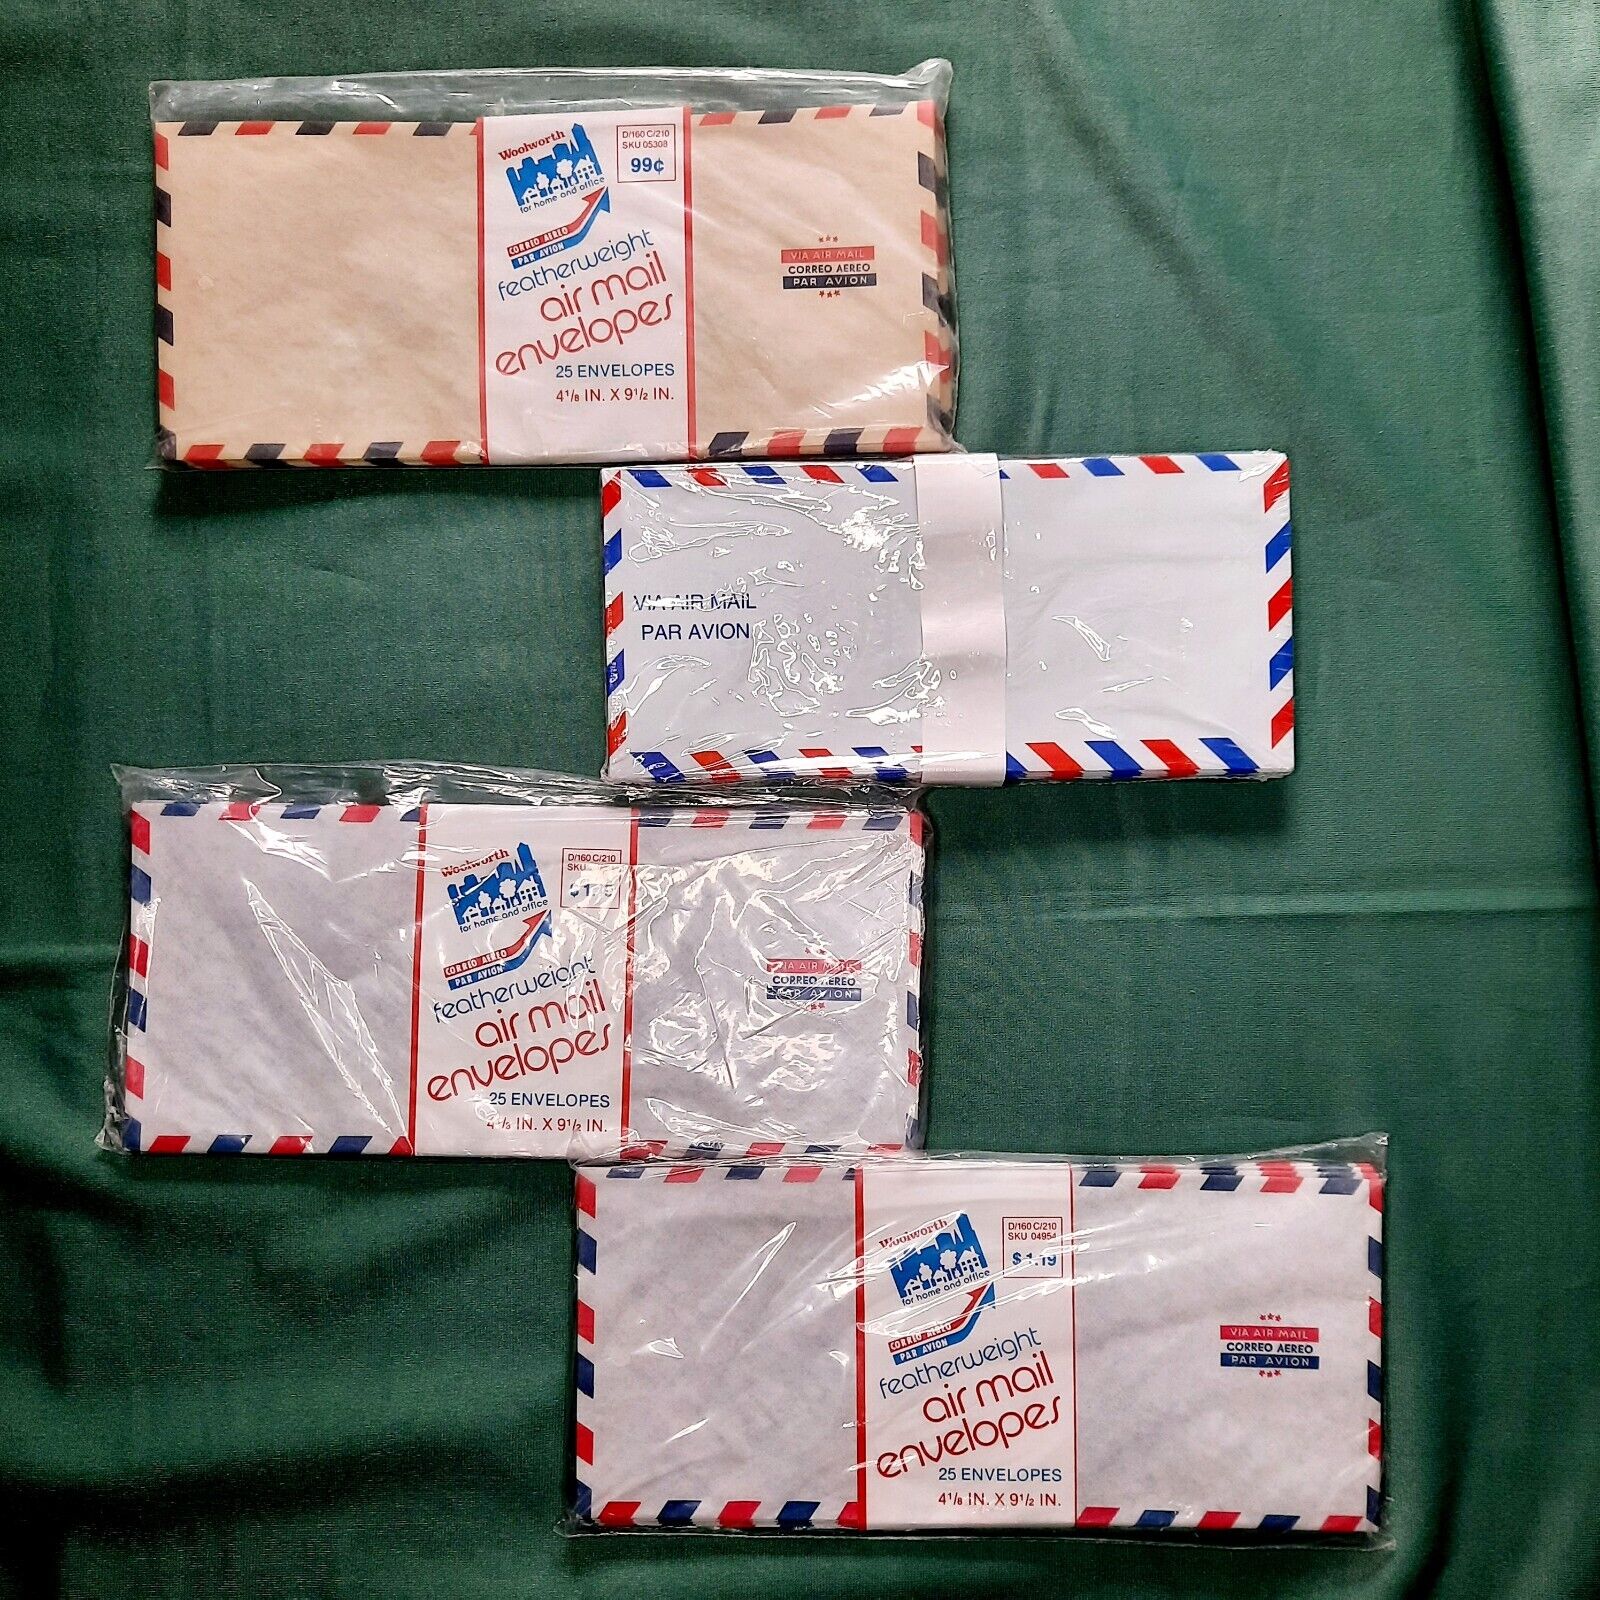 100 Vintage Air Mail Envelopes 2 Sizes 3 Styles Sealed Packages New Old Stock